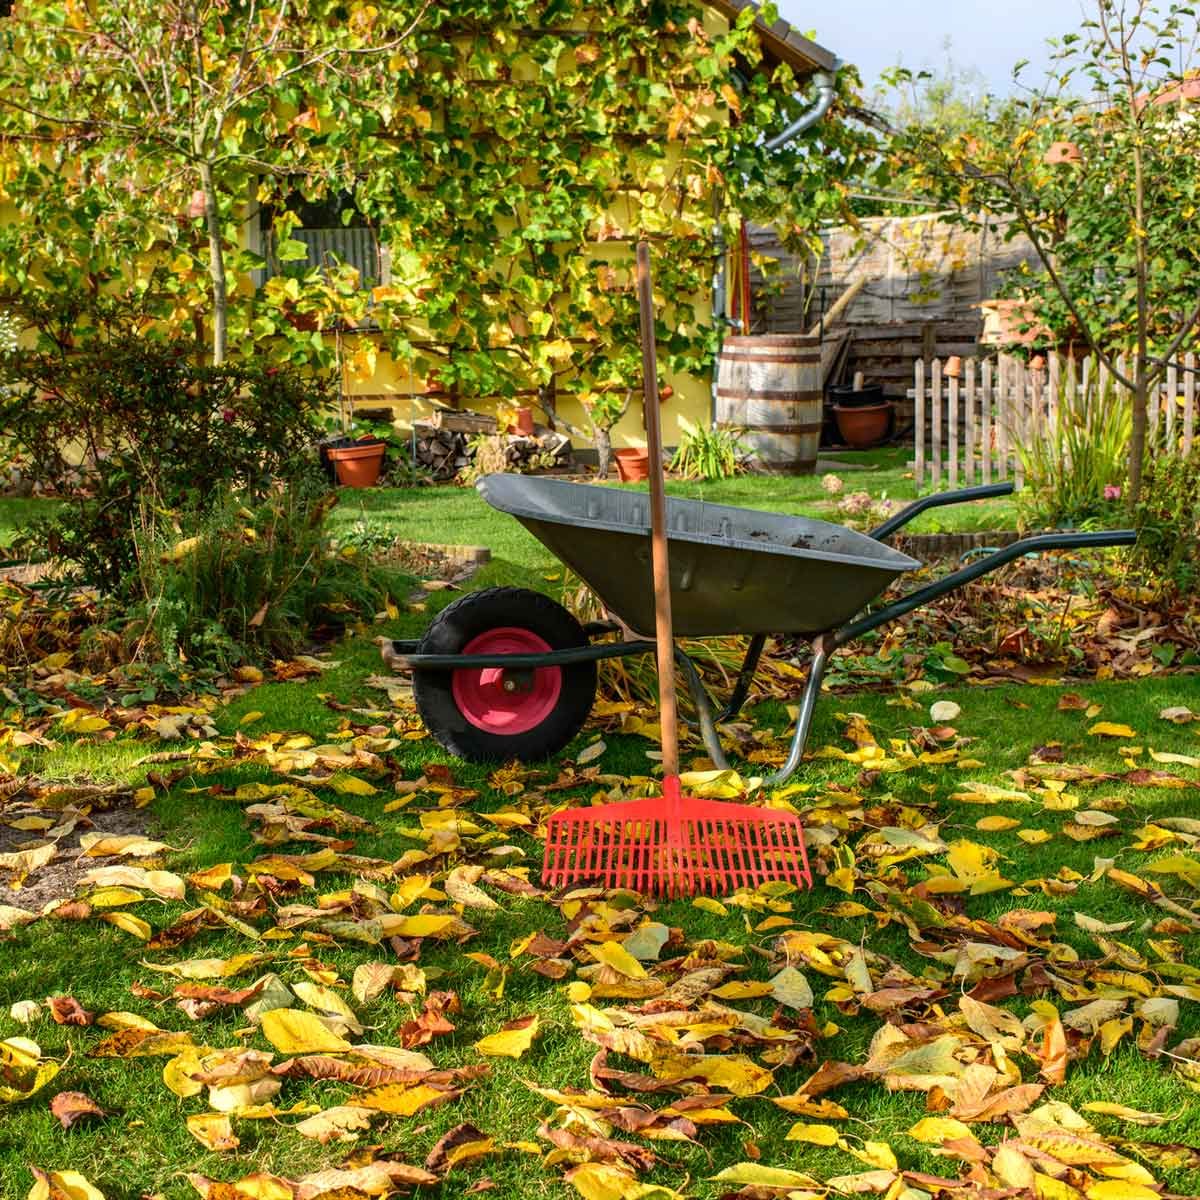 Tips for Preparing the Lawn for the Fall